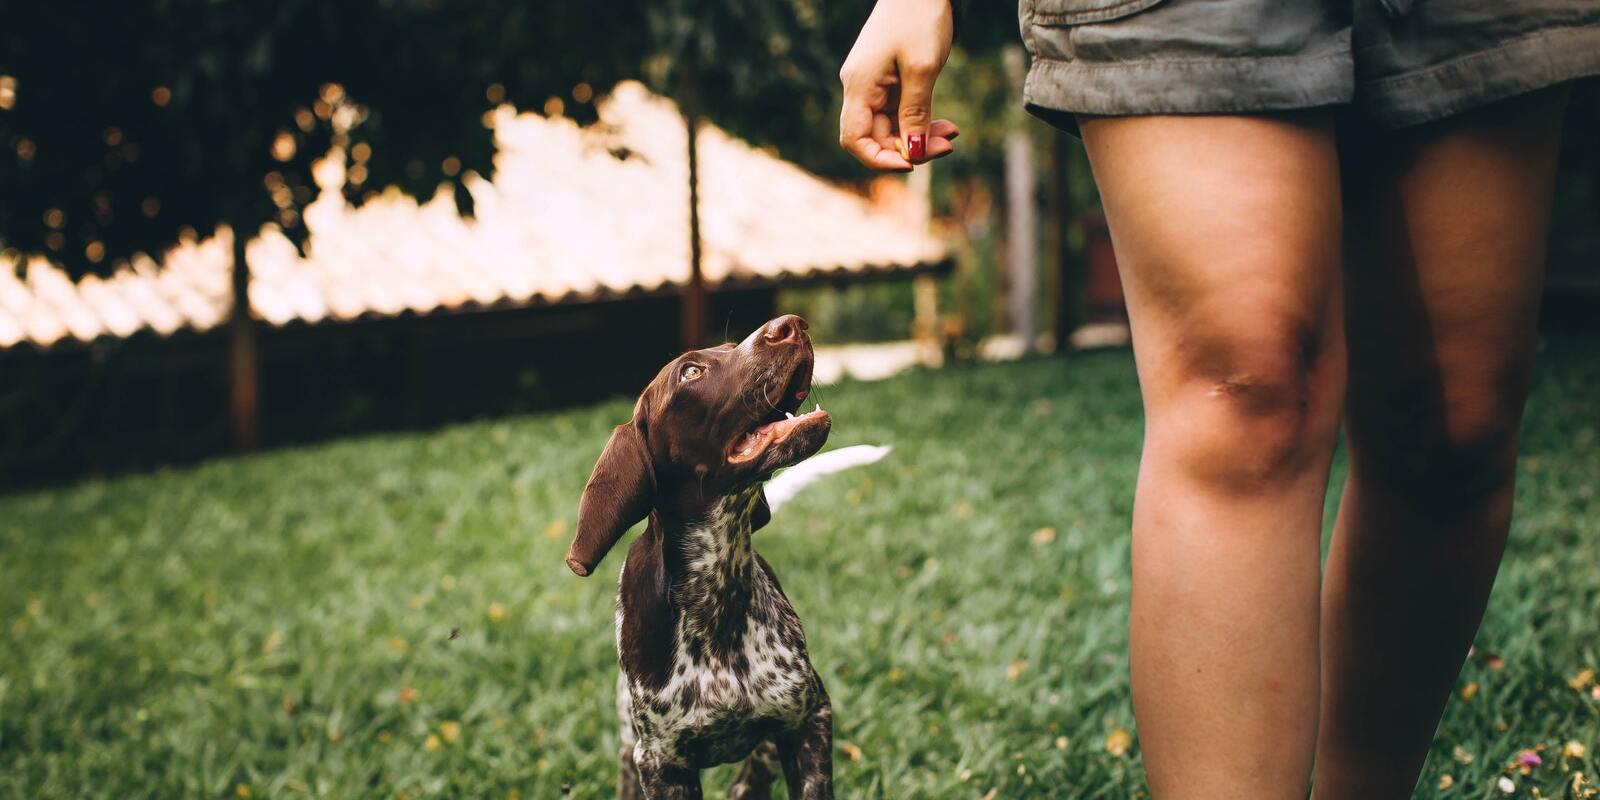 Four Dog Walking Tips During COVID-19